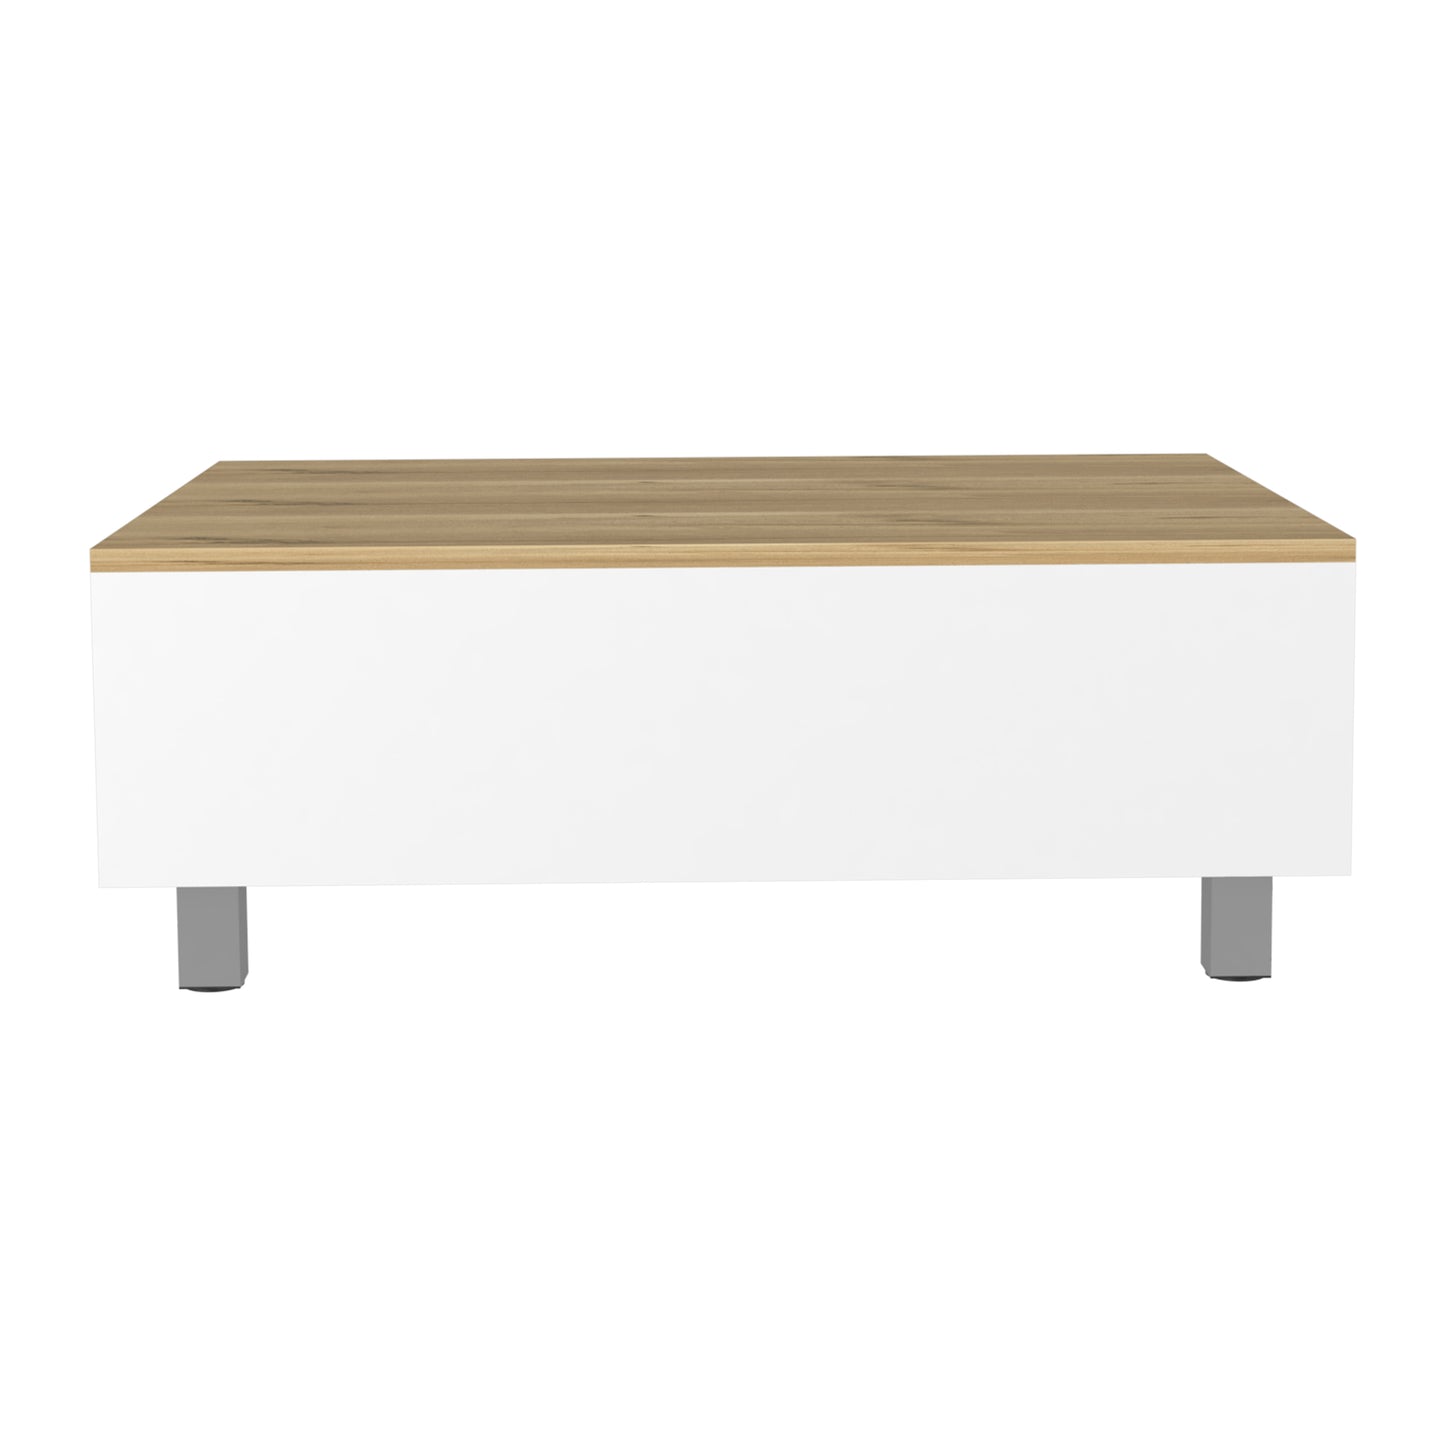 Elegant Lift Top Coffee Table in White and Light Oak with Four Legs